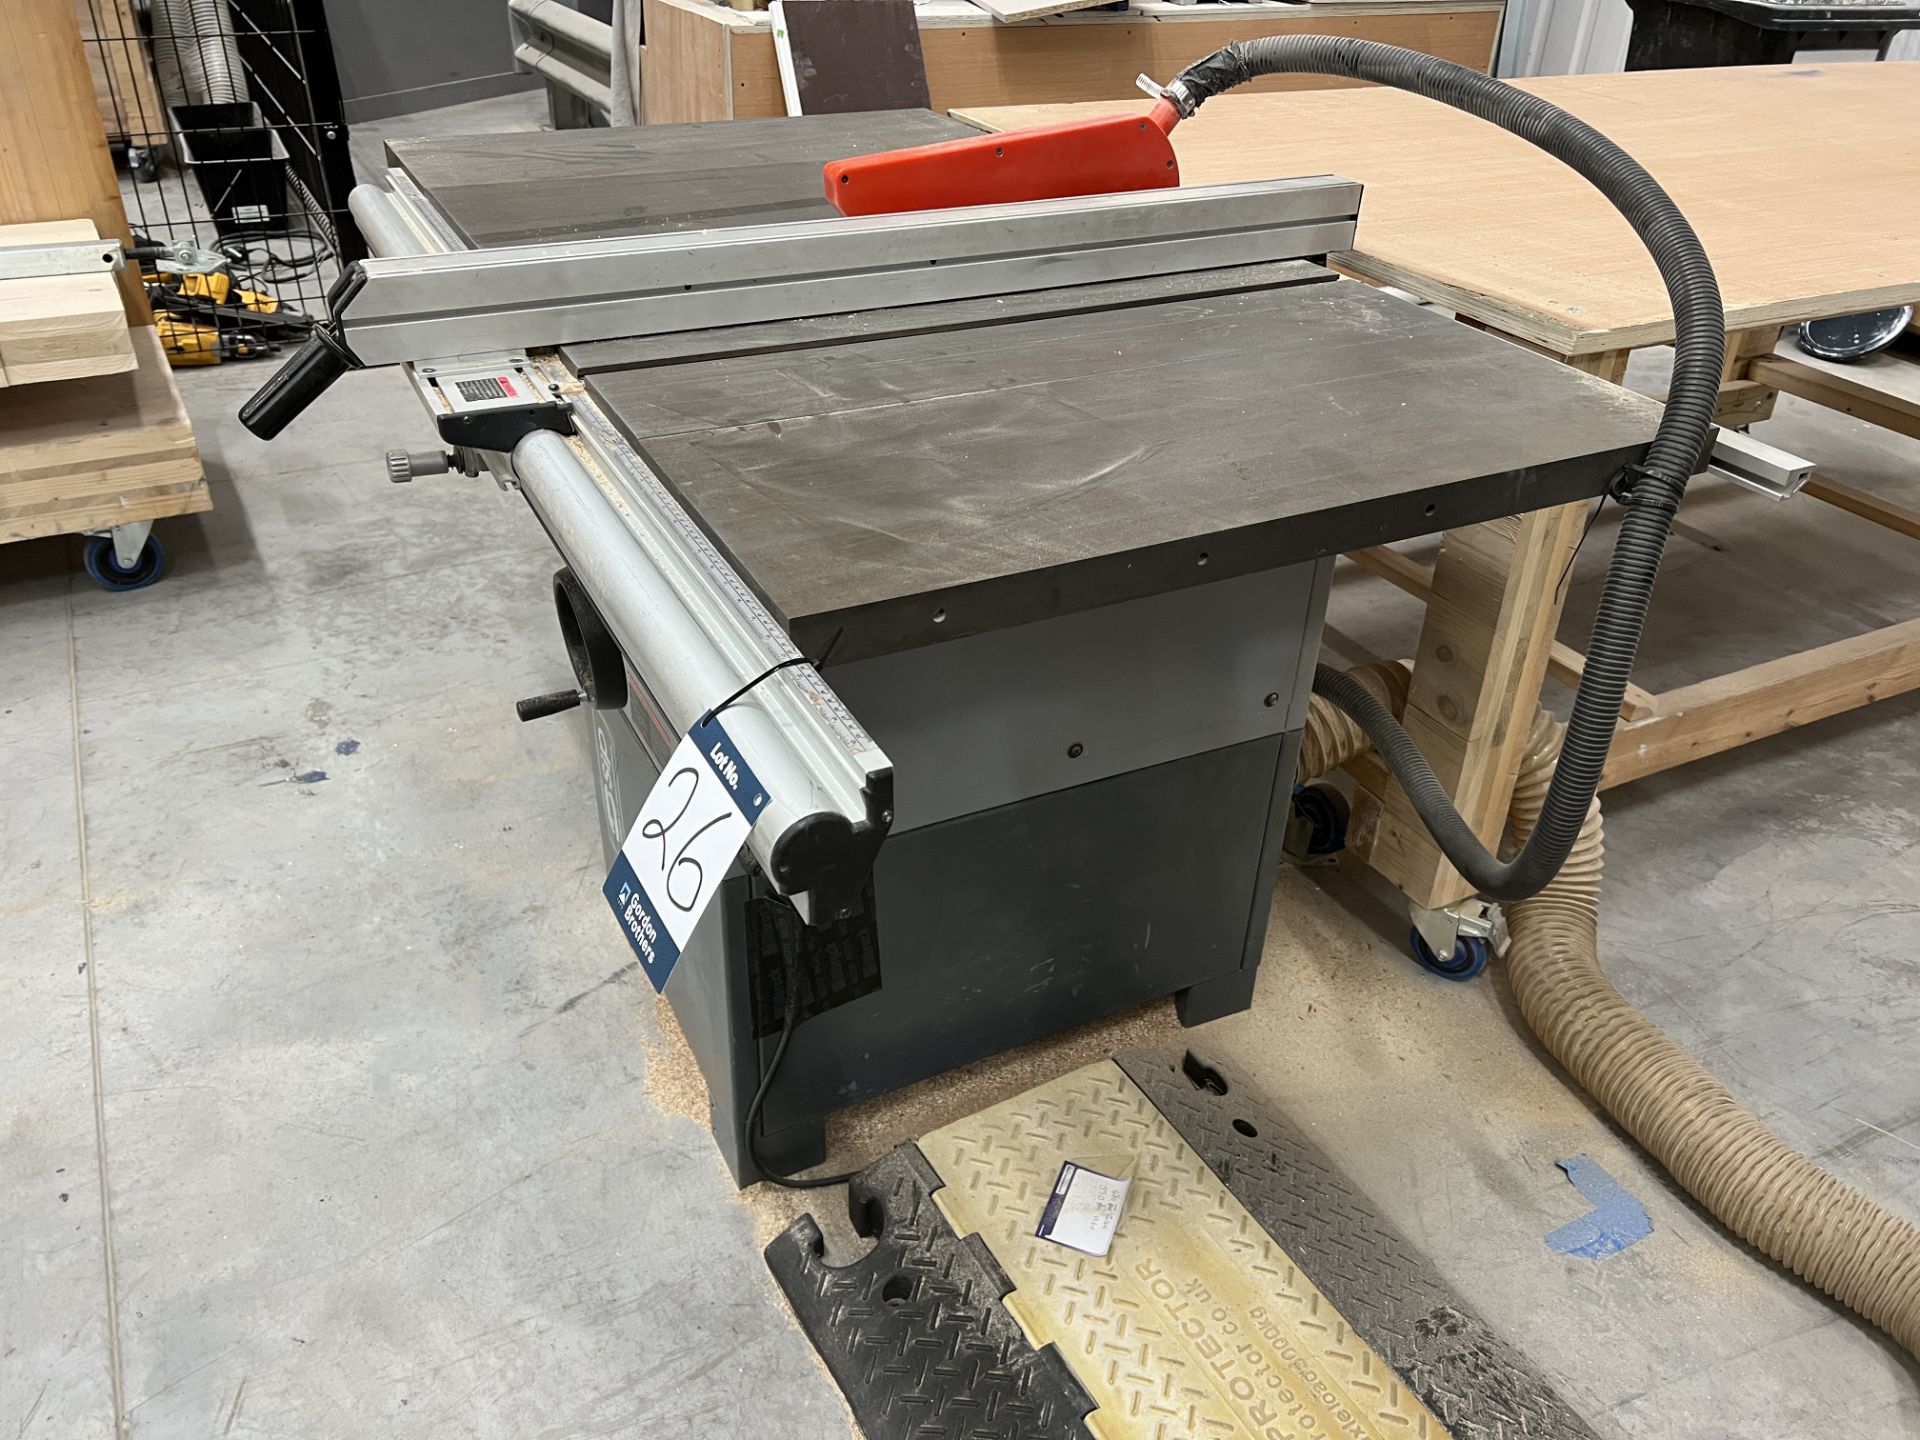 SIP 01332 10" H/D table saw, cutting capacity 75mm max. 230 volts, 0-45° tilting works table, - Image 3 of 7